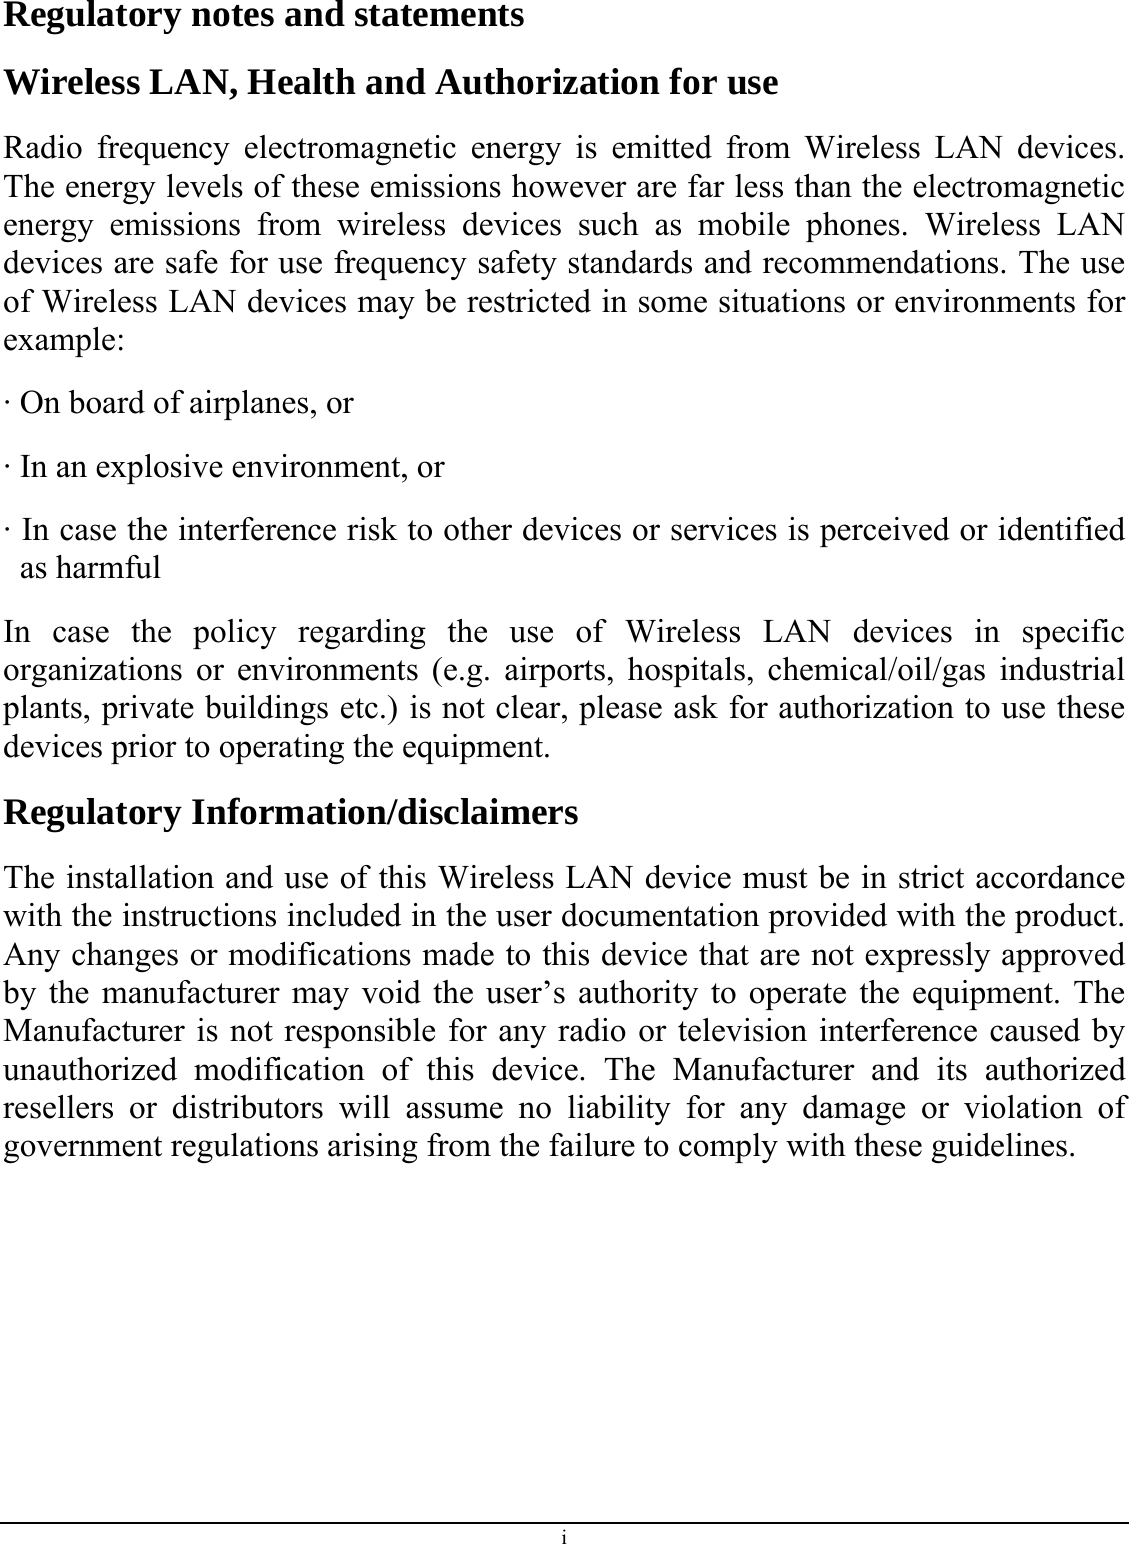 i Regulatory notes and statements Wireless LAN, Health and Authorization for use Radio frequency electromagnetic energy is emitted from Wireless LAN devices. The energy levels of these emissions however are far less than the electromagnetic energy emissions from wireless devices such as mobile phones. Wireless LAN devices are safe for use frequency safety standards and recommendations. The use of Wireless LAN devices may be restricted in some situations or environments for example: · On board of airplanes, or · In an explosive environment, or · In case the interference risk to other devices or services is perceived or identified as harmful In case the policy regarding the use of Wireless LAN devices in specific organizations or environments (e.g. airports, hospitals, chemical/oil/gas industrial plants, private buildings etc.) is not clear, please ask for authorization to use these devices prior to operating the equipment. Regulatory Information/disclaimers The installation and use of this Wireless LAN device must be in strict accordance with the instructions included in the user documentation provided with the product. Any changes or modifications made to this device that are not expressly approved by the manufacturer may void the user’s authority to operate the equipment. The Manufacturer is not responsible for any radio or television interference caused by unauthorized modification of this device. The Manufacturer and its authorized resellers or distributors will assume no liability for any damage or violation of government regulations arising from the failure to comply with these guidelines. 